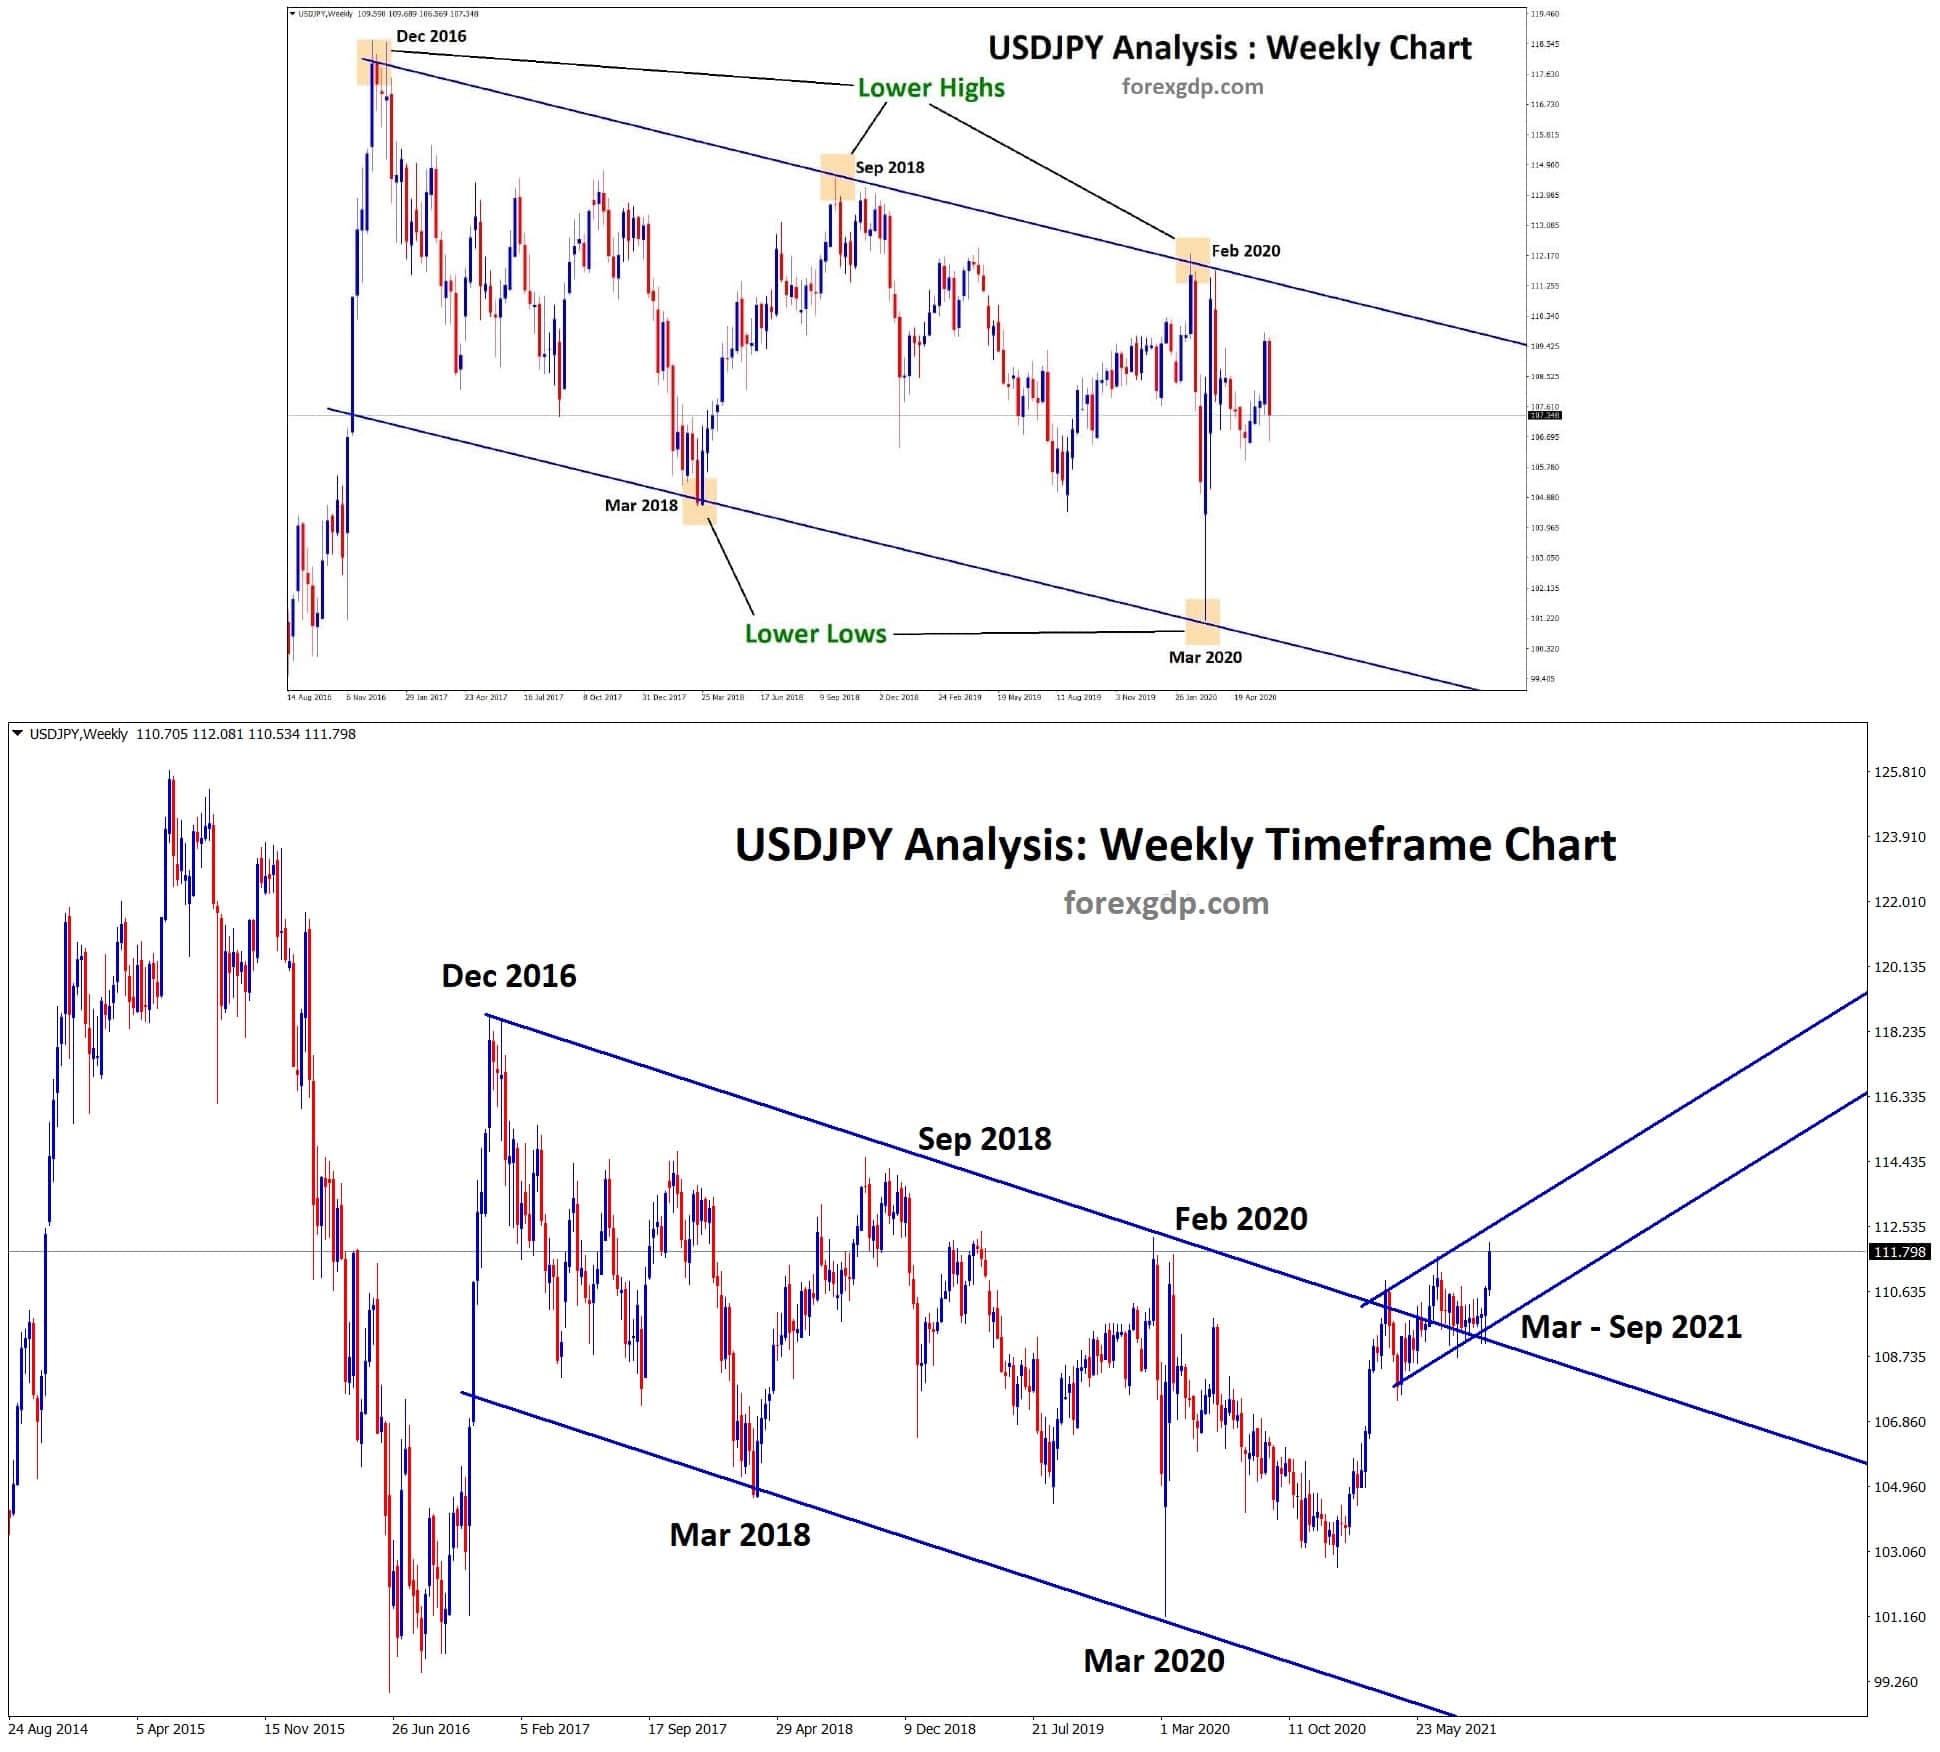 USDJPY is consolidating at the lower high area of the descending channel from march to sep 2021